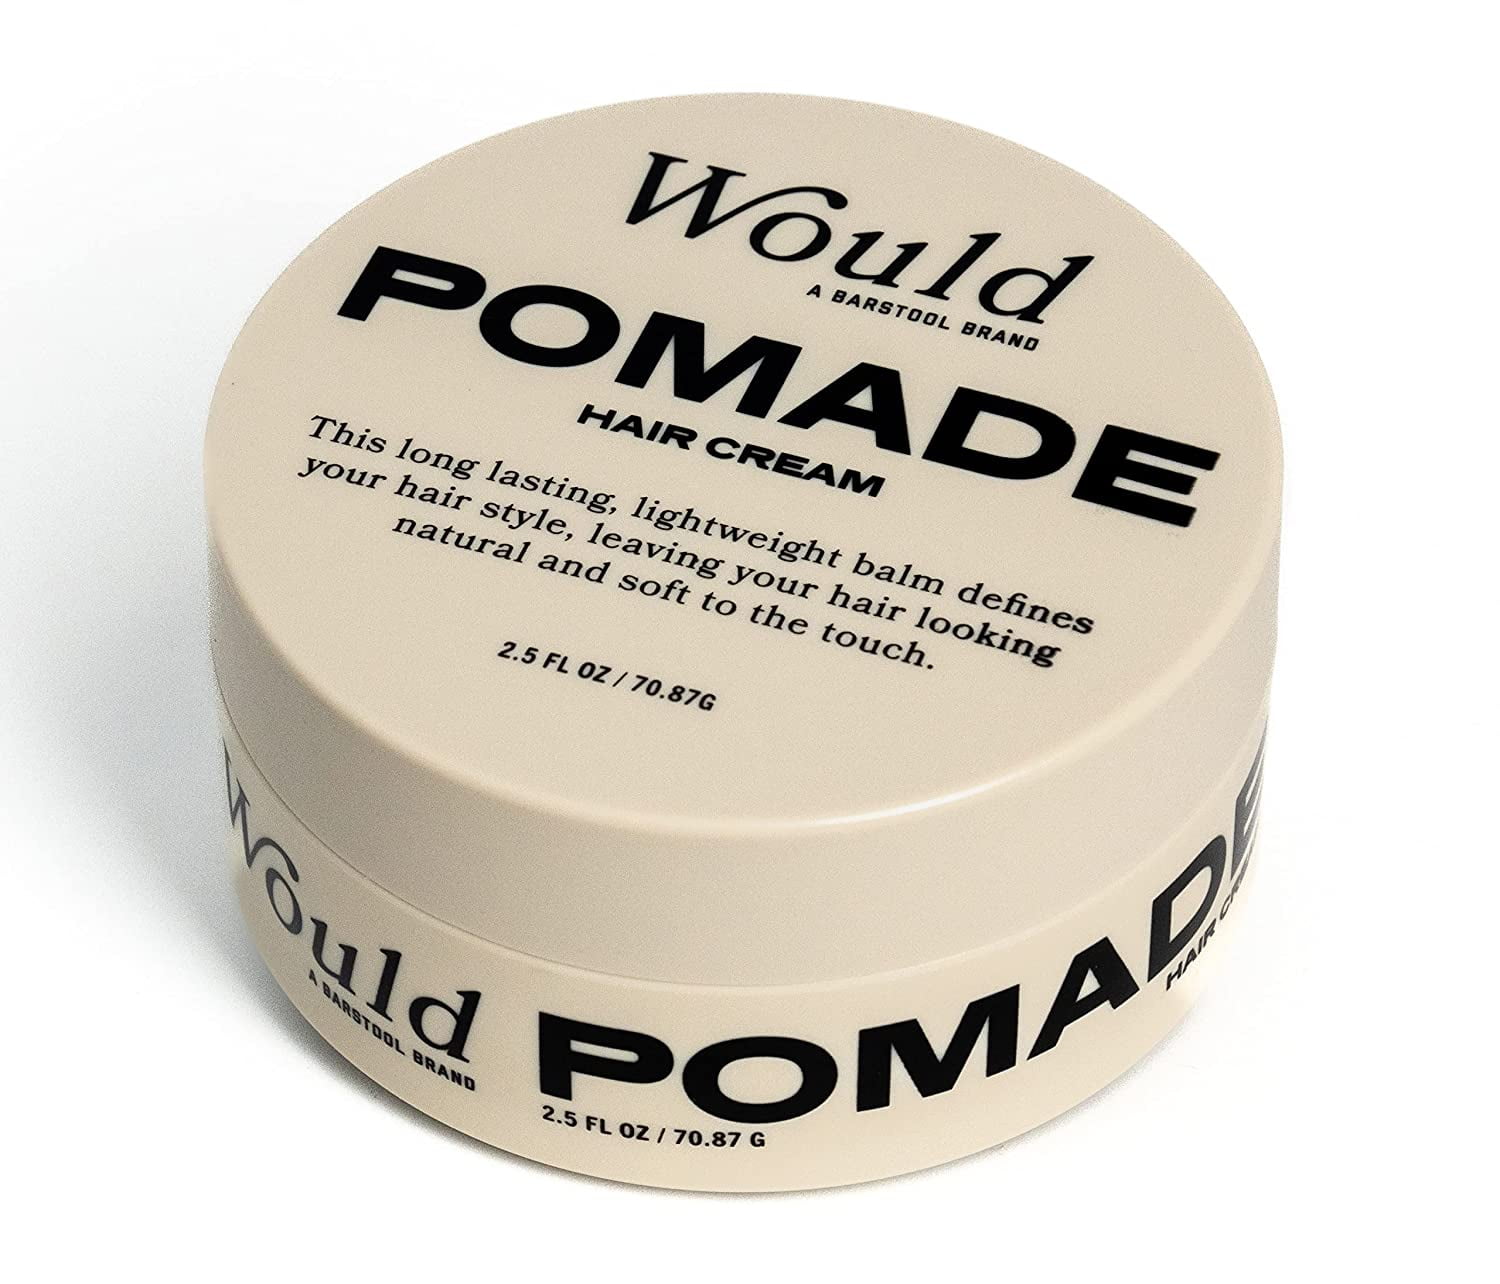 Would Pomade Hair Cream for Men by Barstool Sports,  fl. oz., Natural  Matte Finish, Water Based Medium Hold, Lightweight, Flexible, Soft Touch,  No White Flakes 